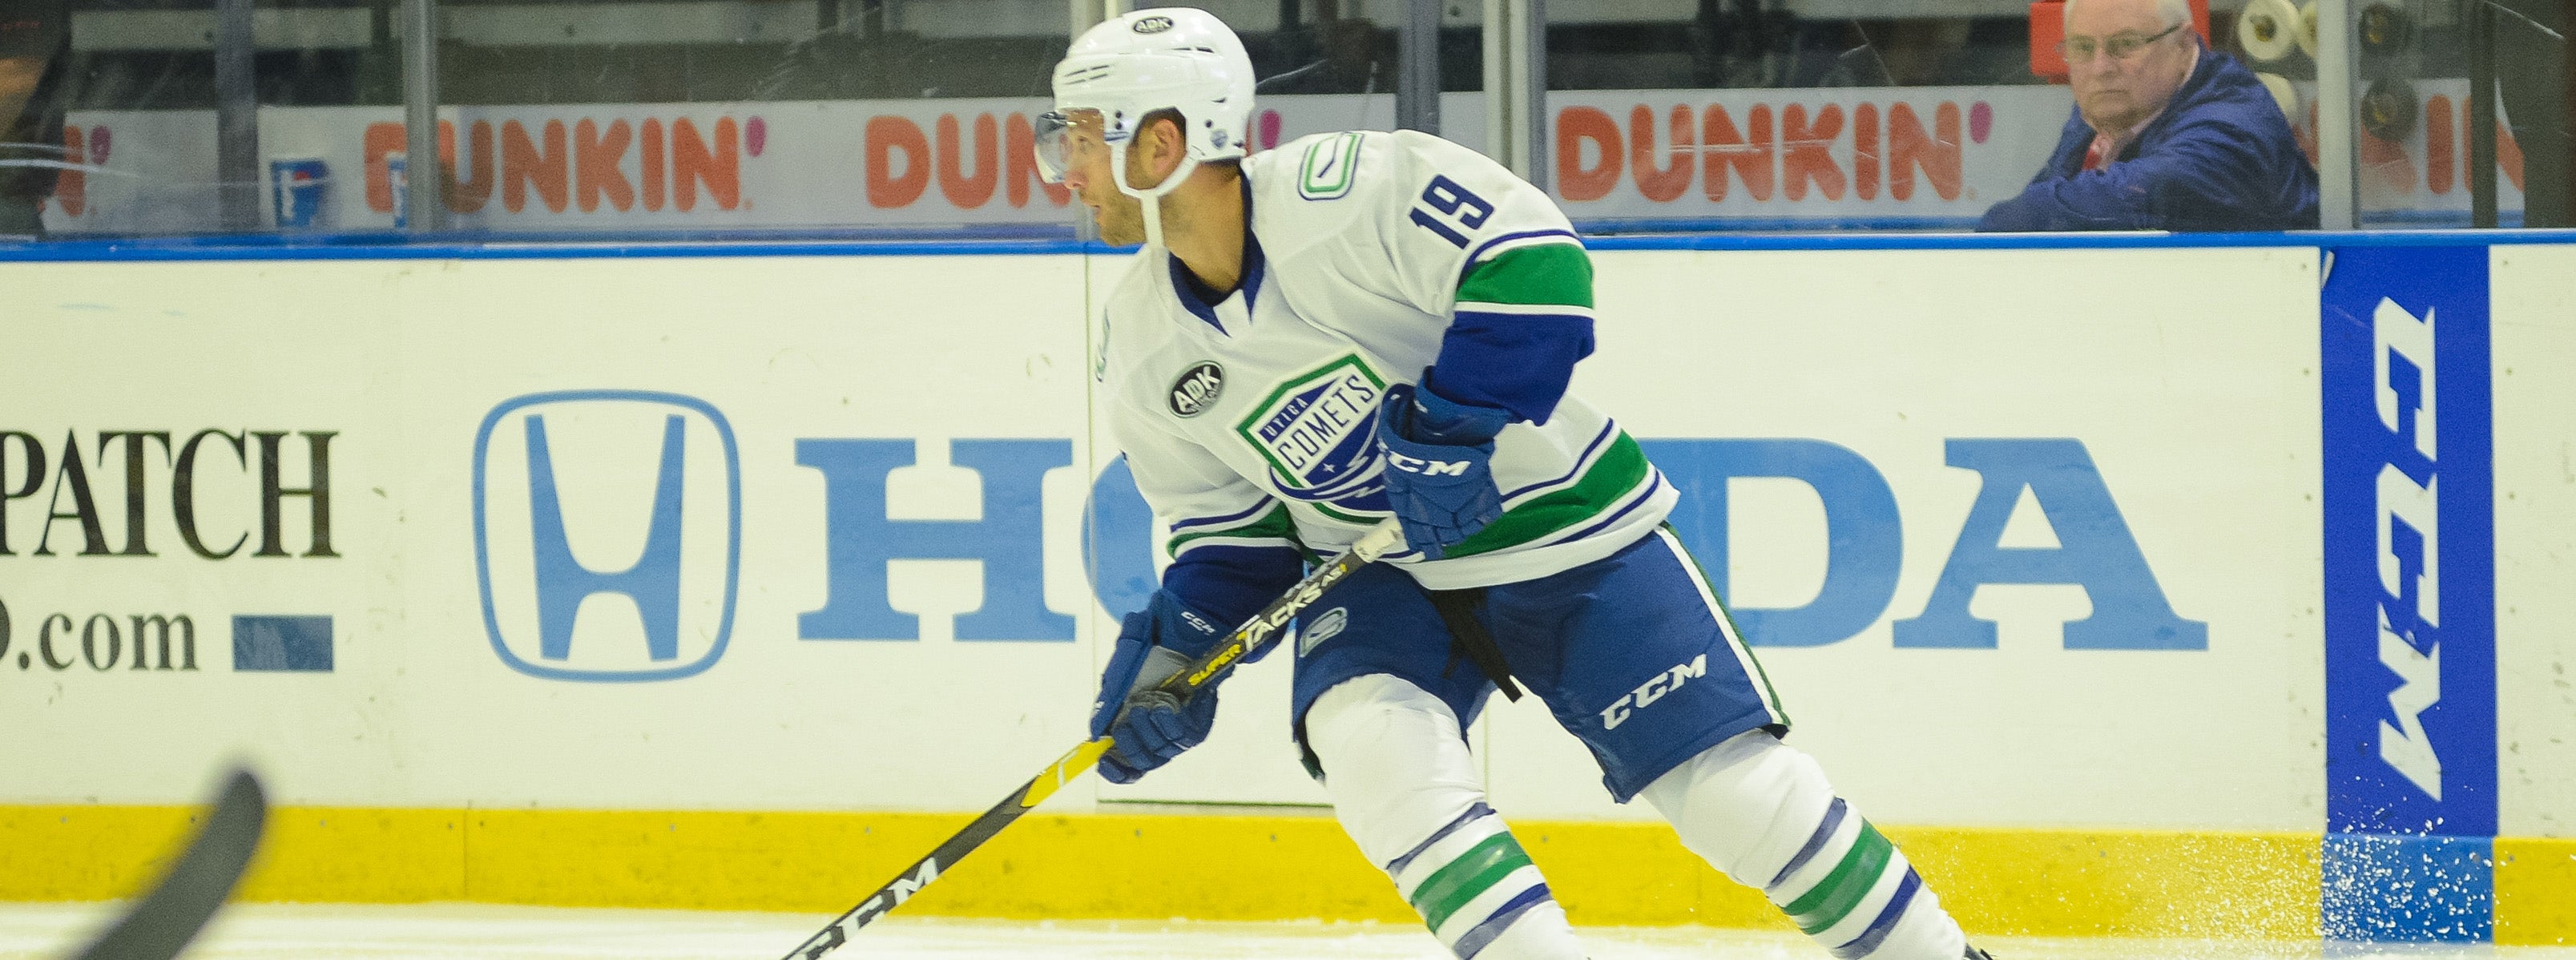 COMETS TAKE ON CRUNCH IN MONDAY MATINEE